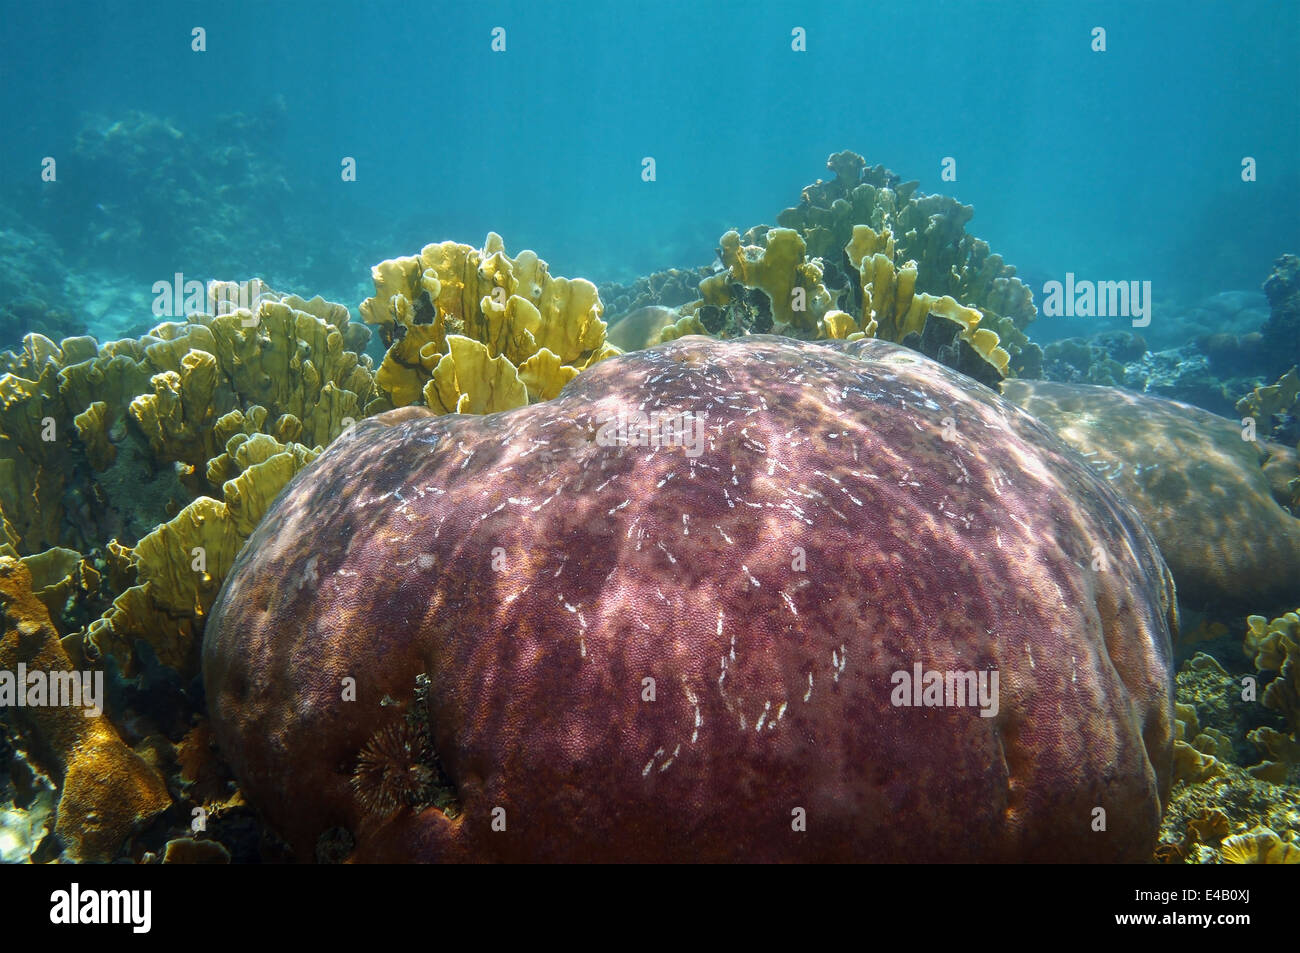 Corals underwater in a reef of the Caribbean sea Stock Photo